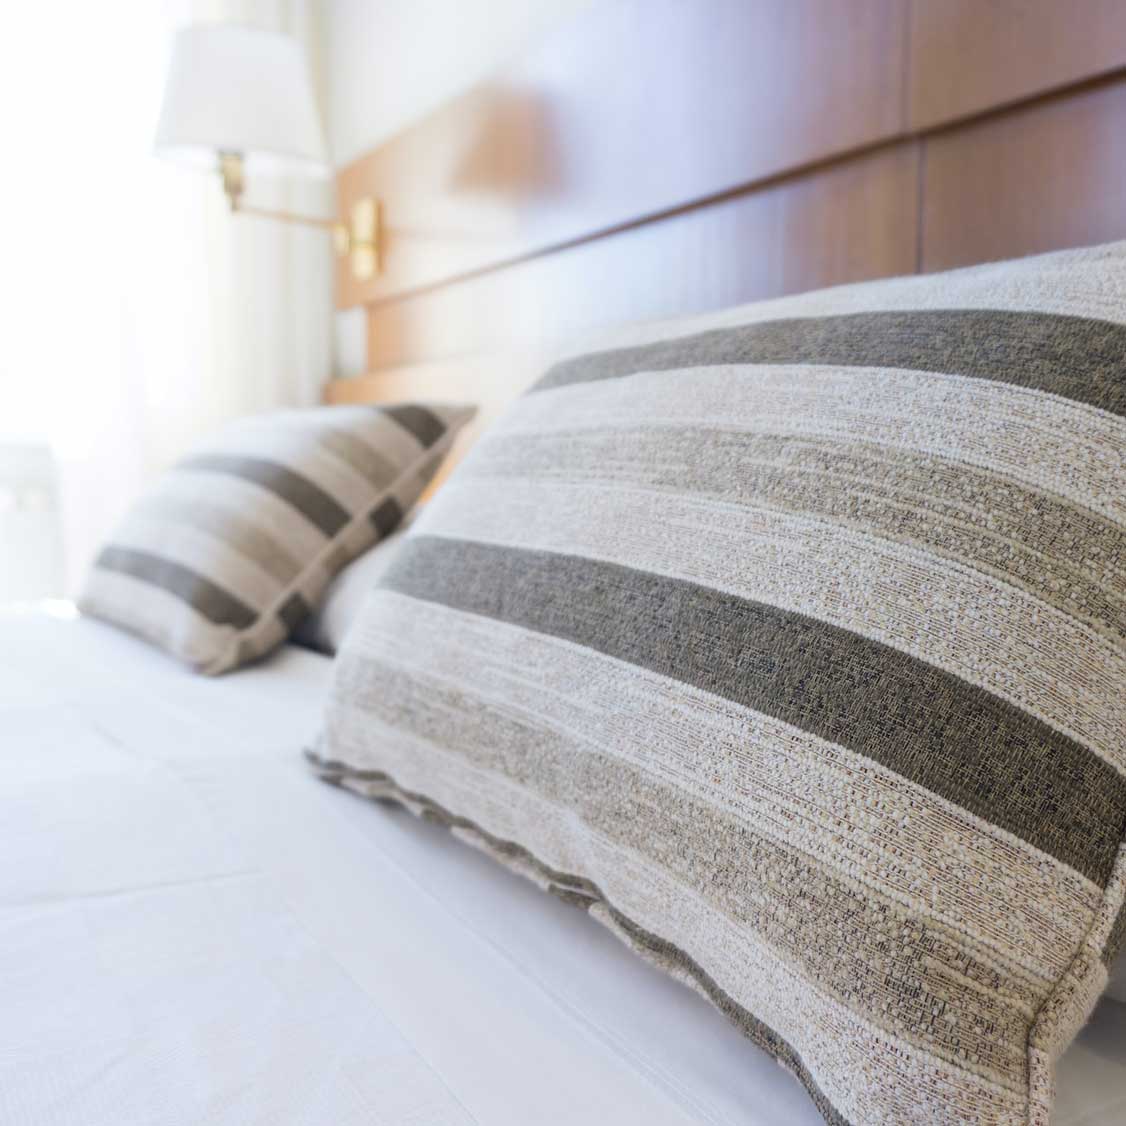 Image of gray hotel pillows.